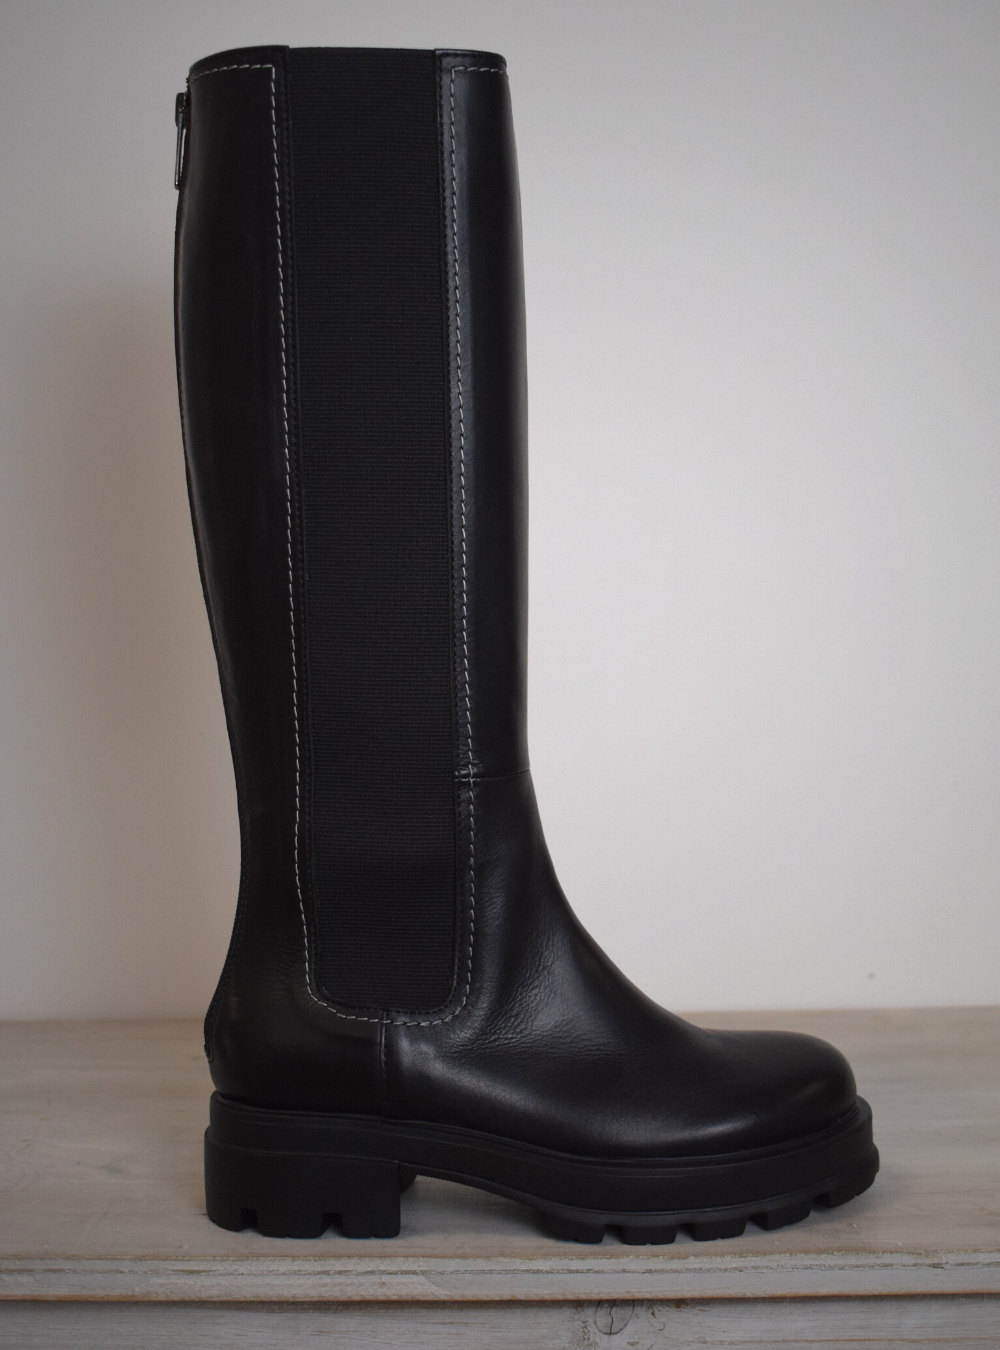 Black boot with white edging 